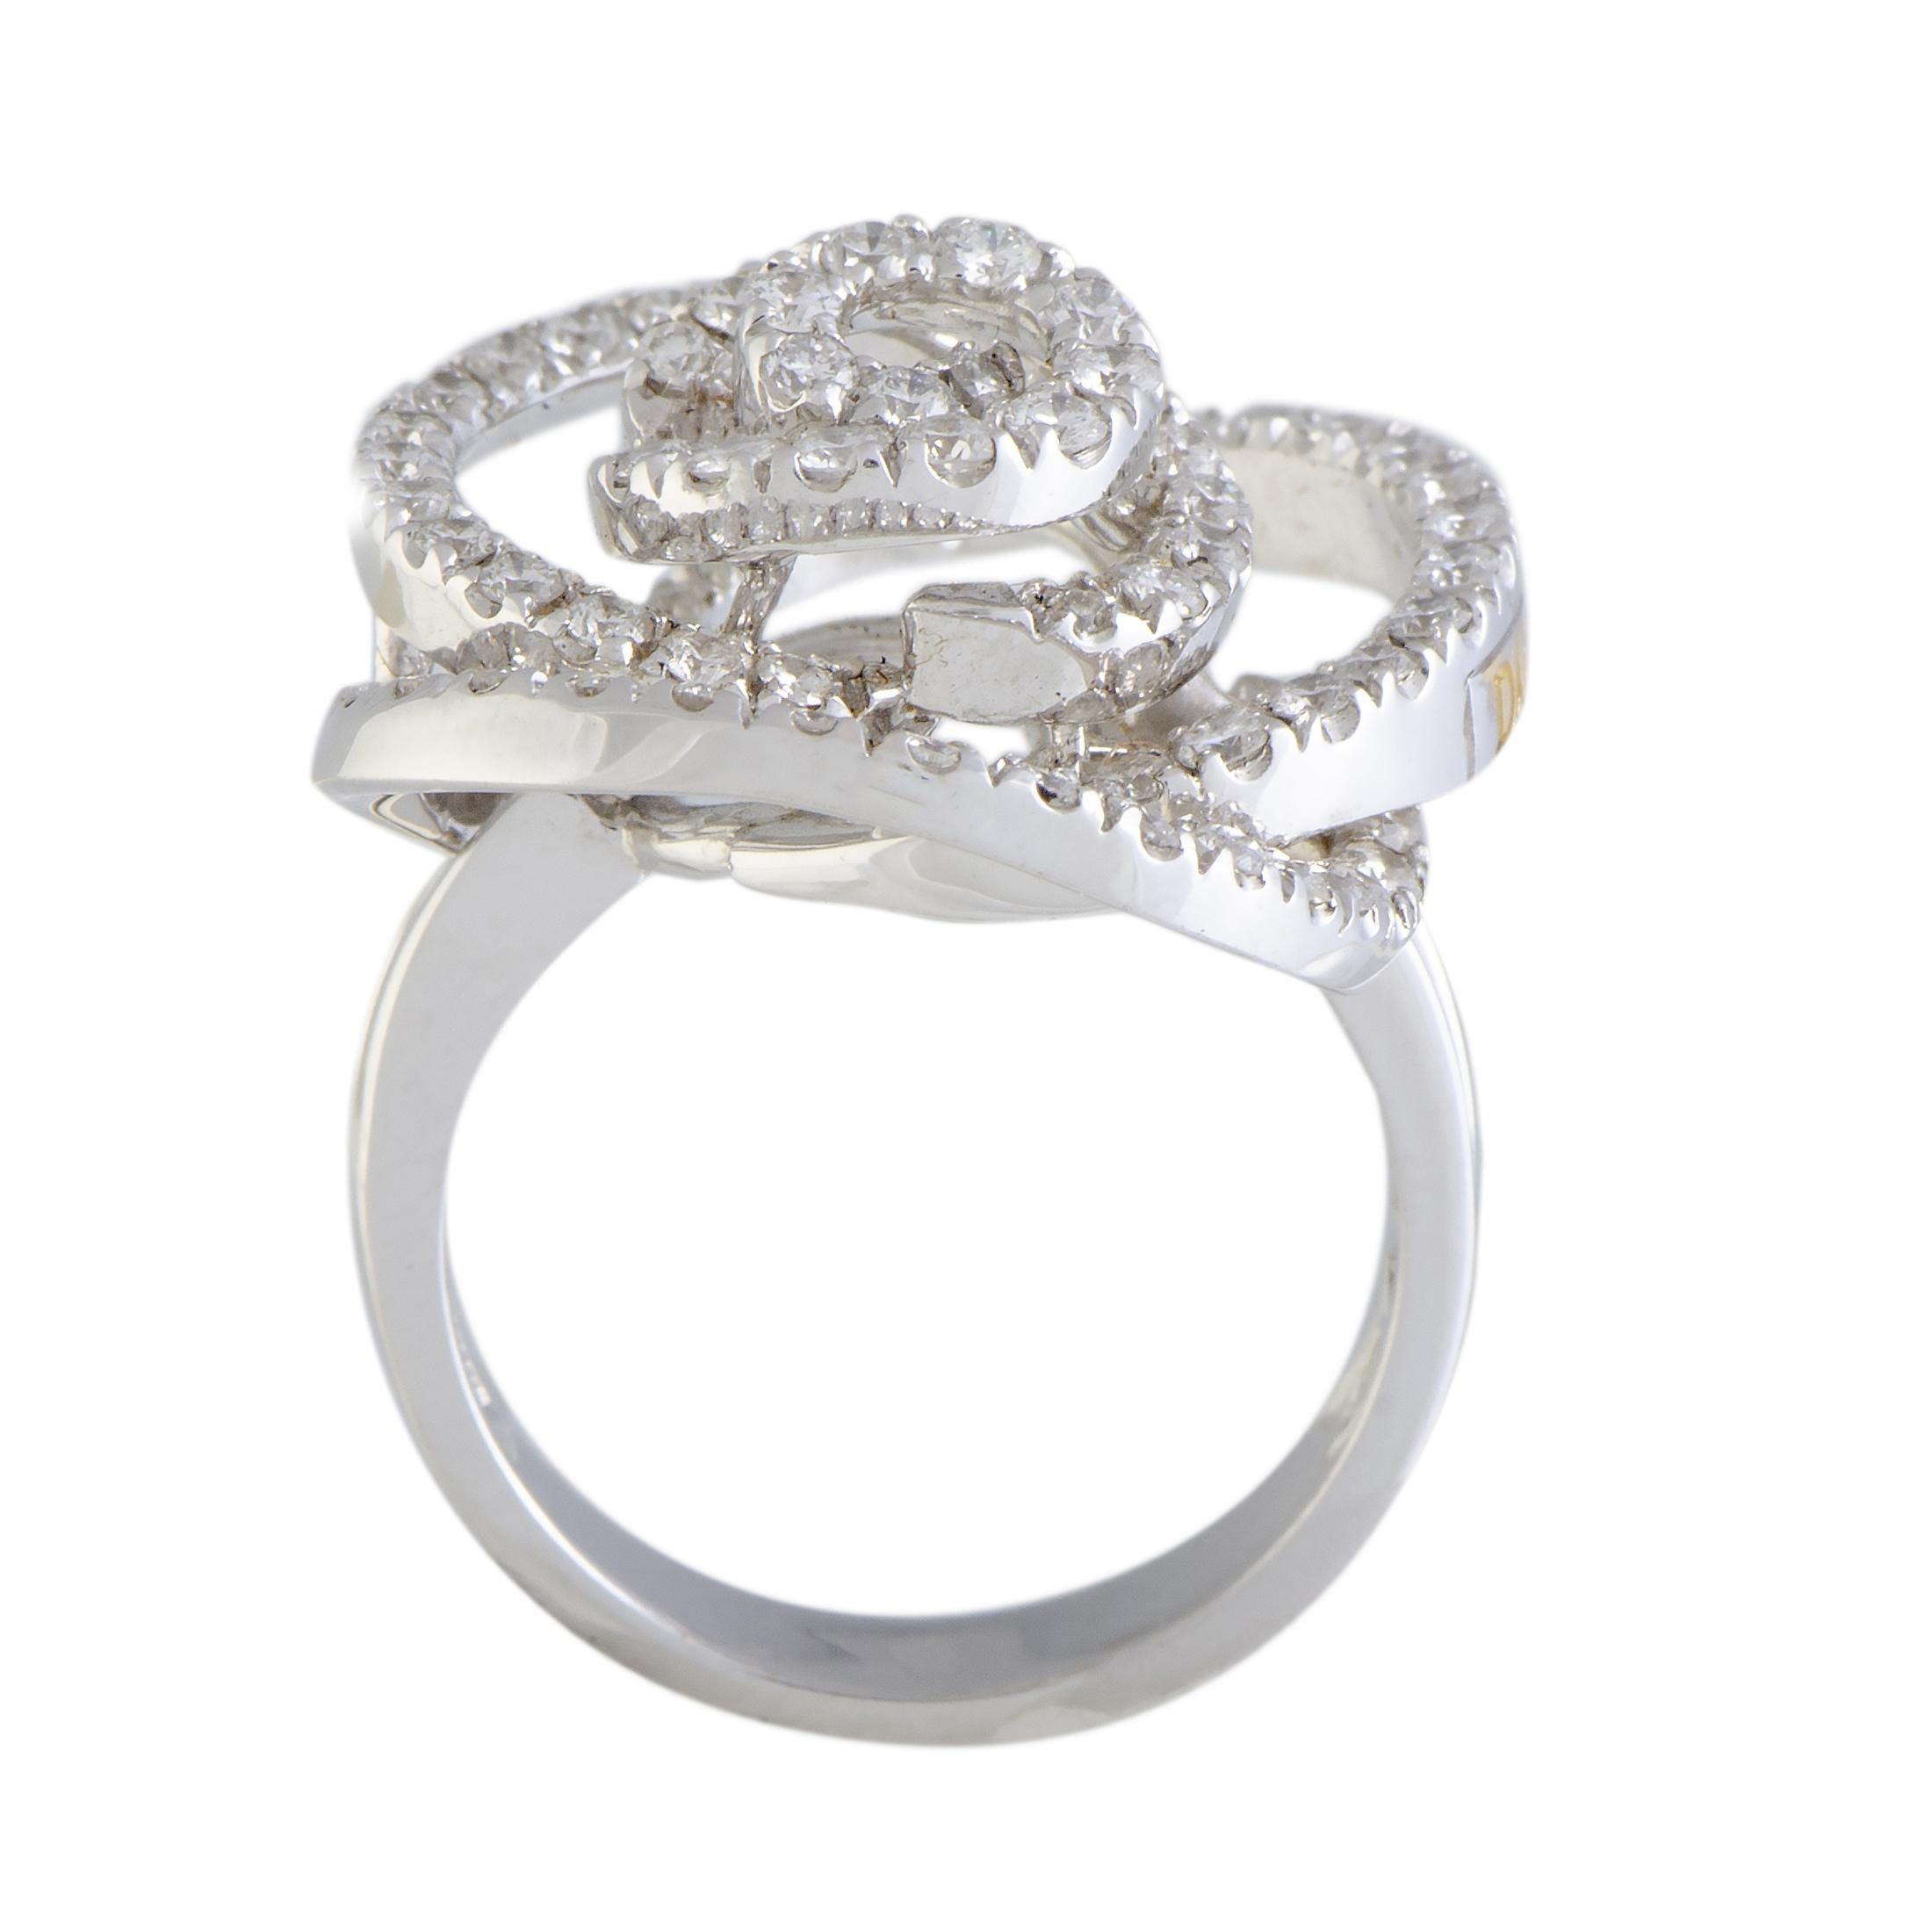 Remarkably designed in the shape of a rose, this perfect ring by Damiani is made to adorn your finger. Crafted in shimmering 18K white gold, the beautiful ring is embellished with 1.44ct of sparkling diamonds that enhance the aesthetic of the